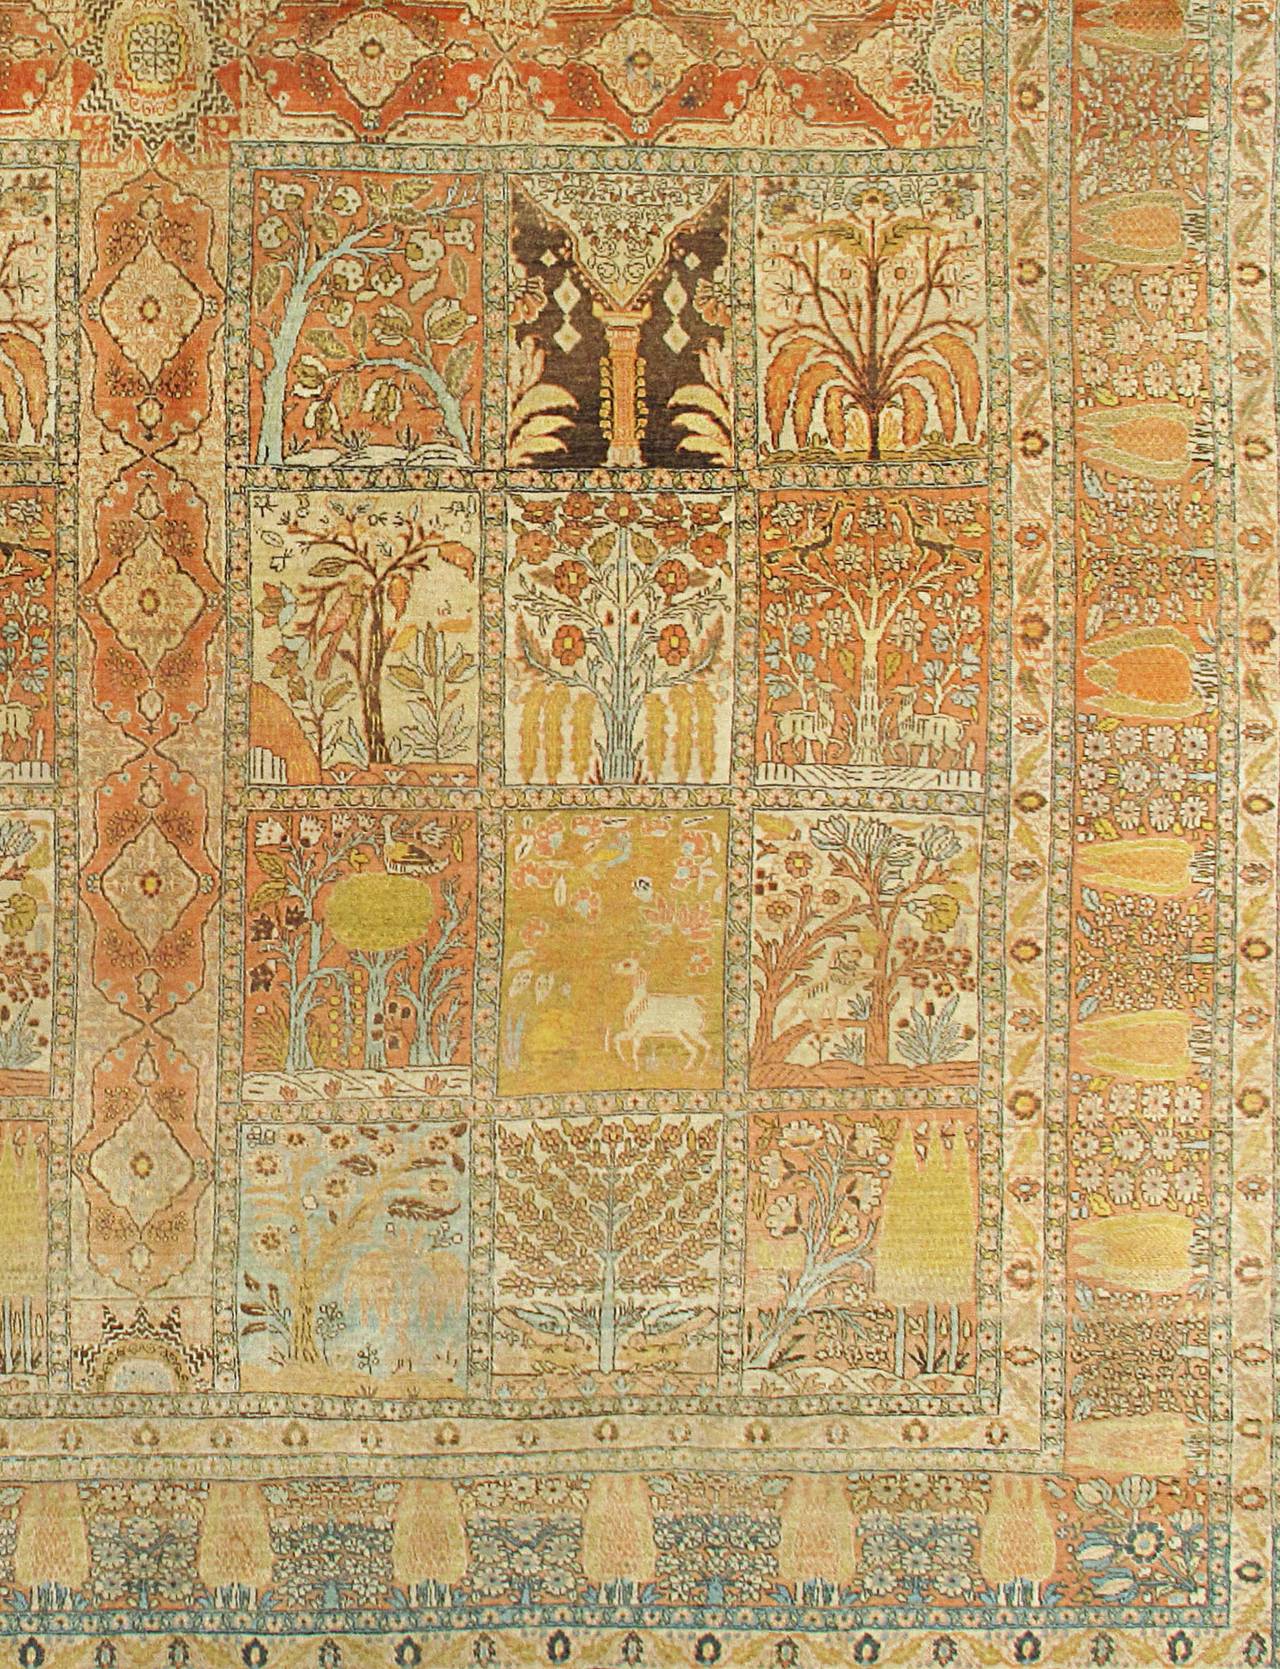 Antique Tabriz rug carpet, circa 1880. Among the most classical of the revival period Tabriz carpet designs is that of the garden design pattern. This divides the field into small panels each with a garden motif: trees shrubs animals. The trees